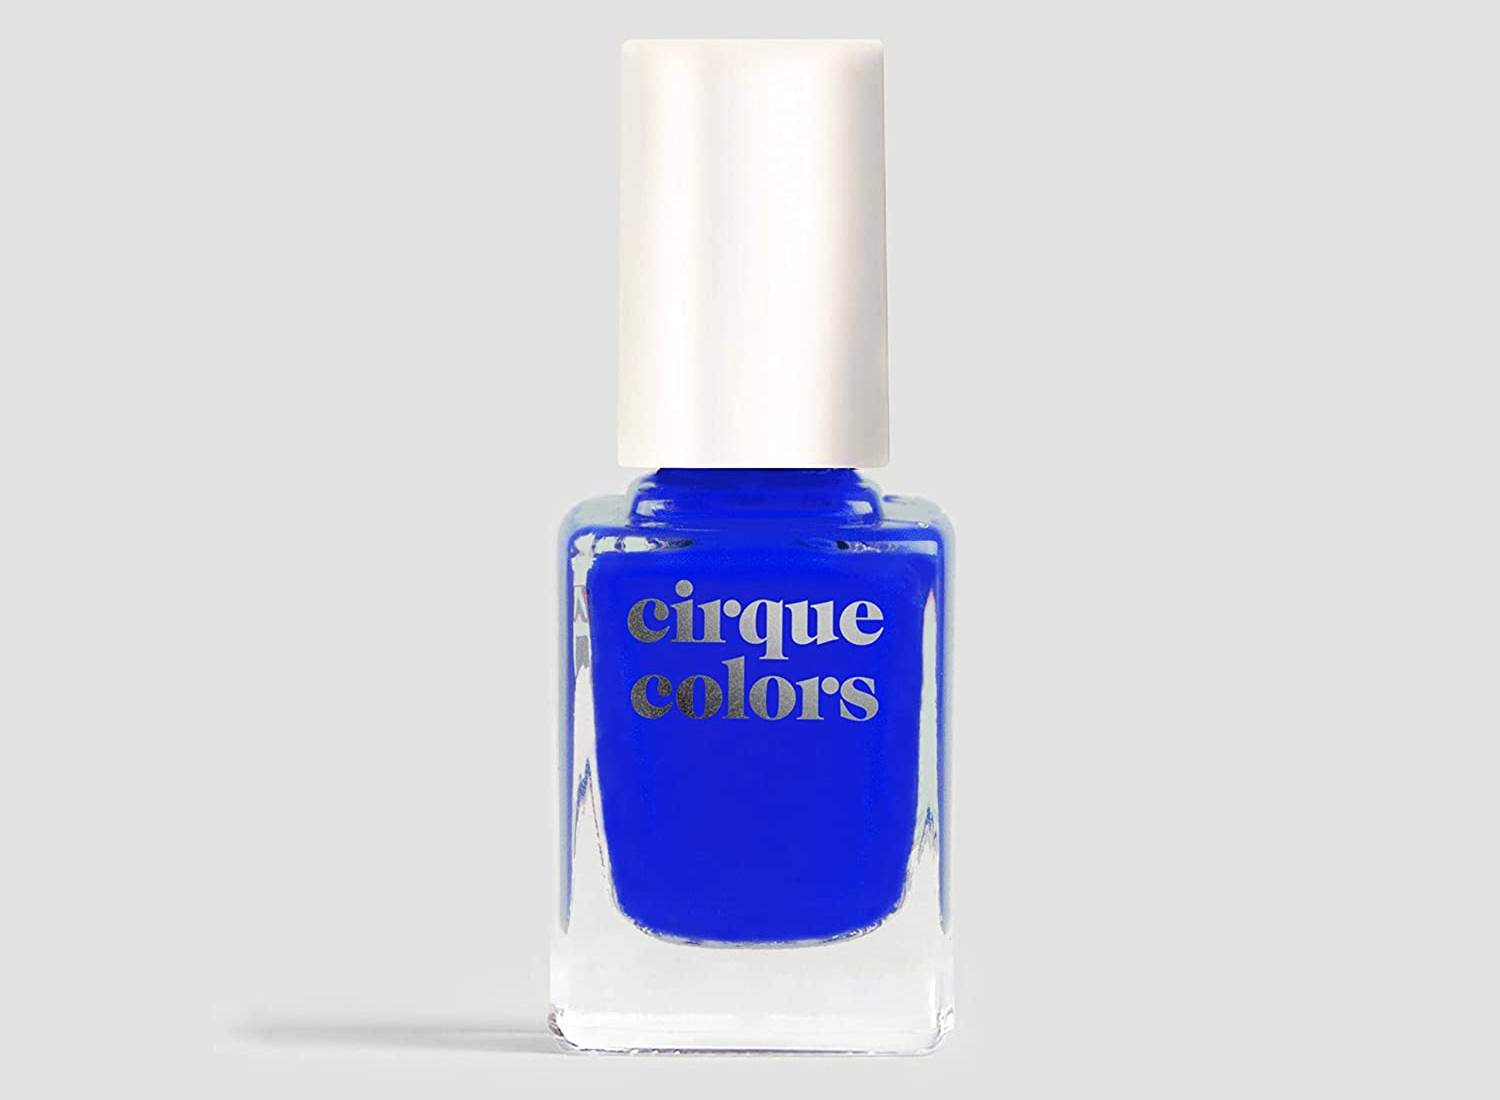 A bottle of Cirque colors dark blue creme nail polish in the shade "NYFW"